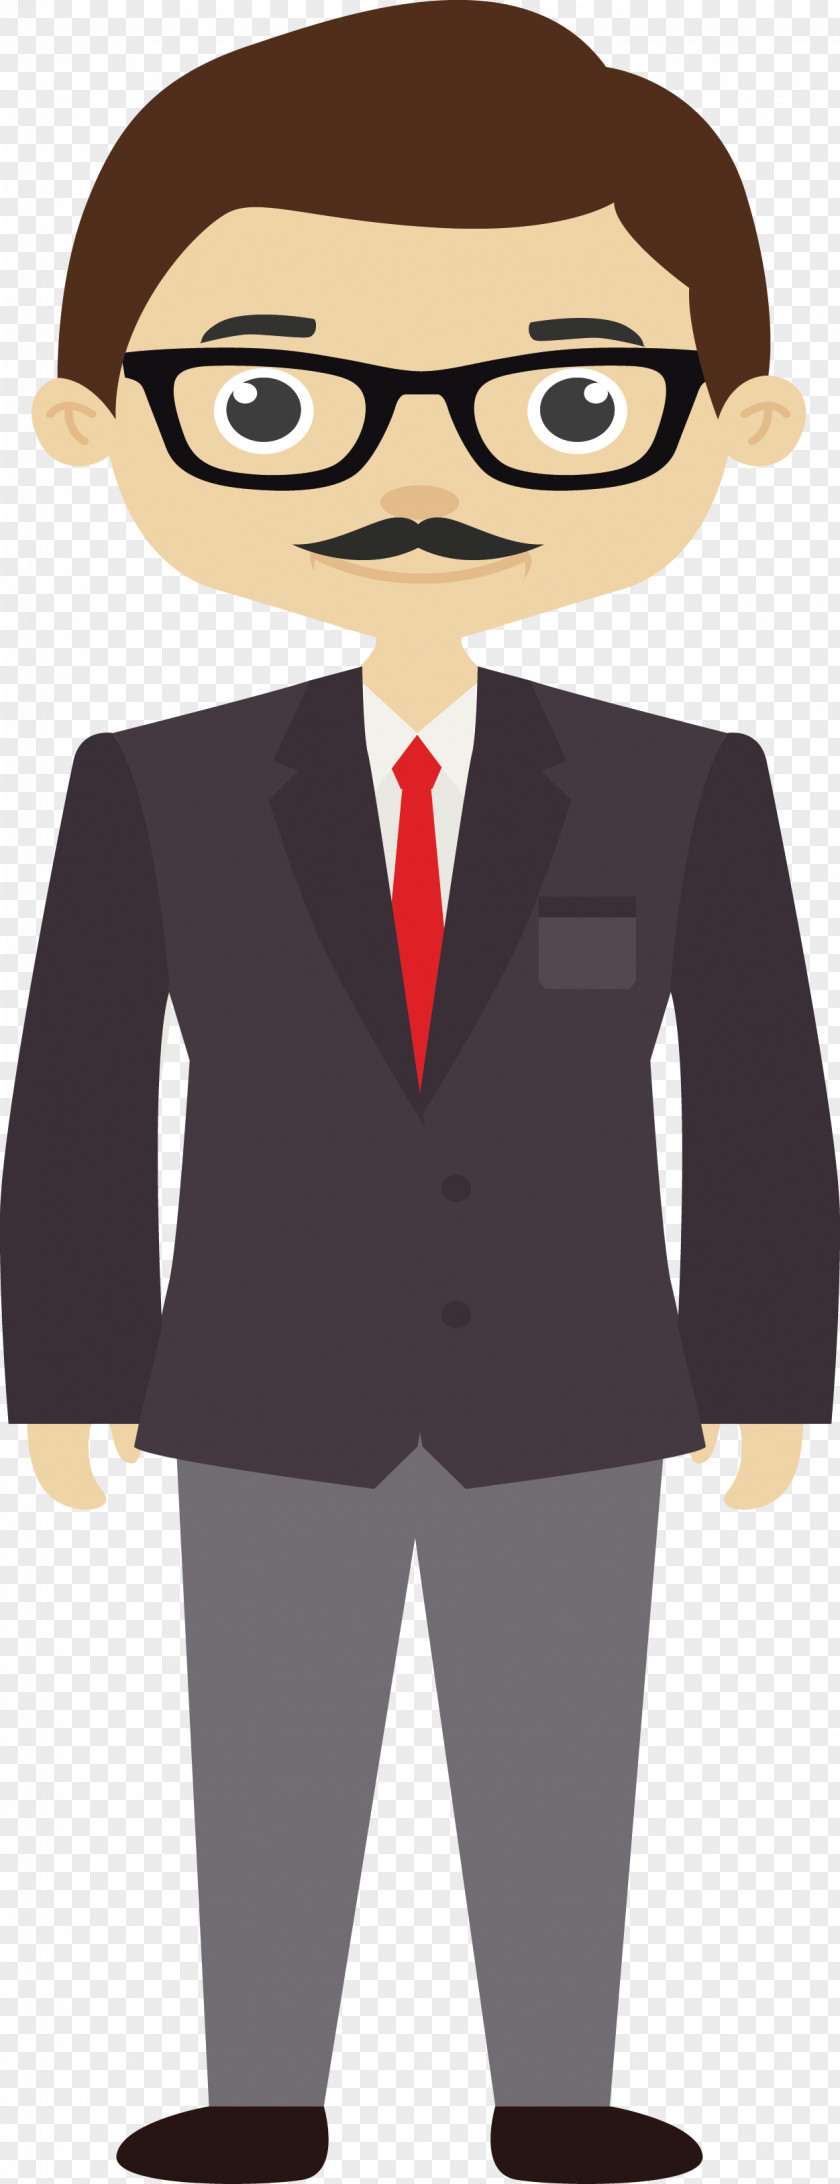 Speaking Of Business Men Euclidean Vector Computer File PNG